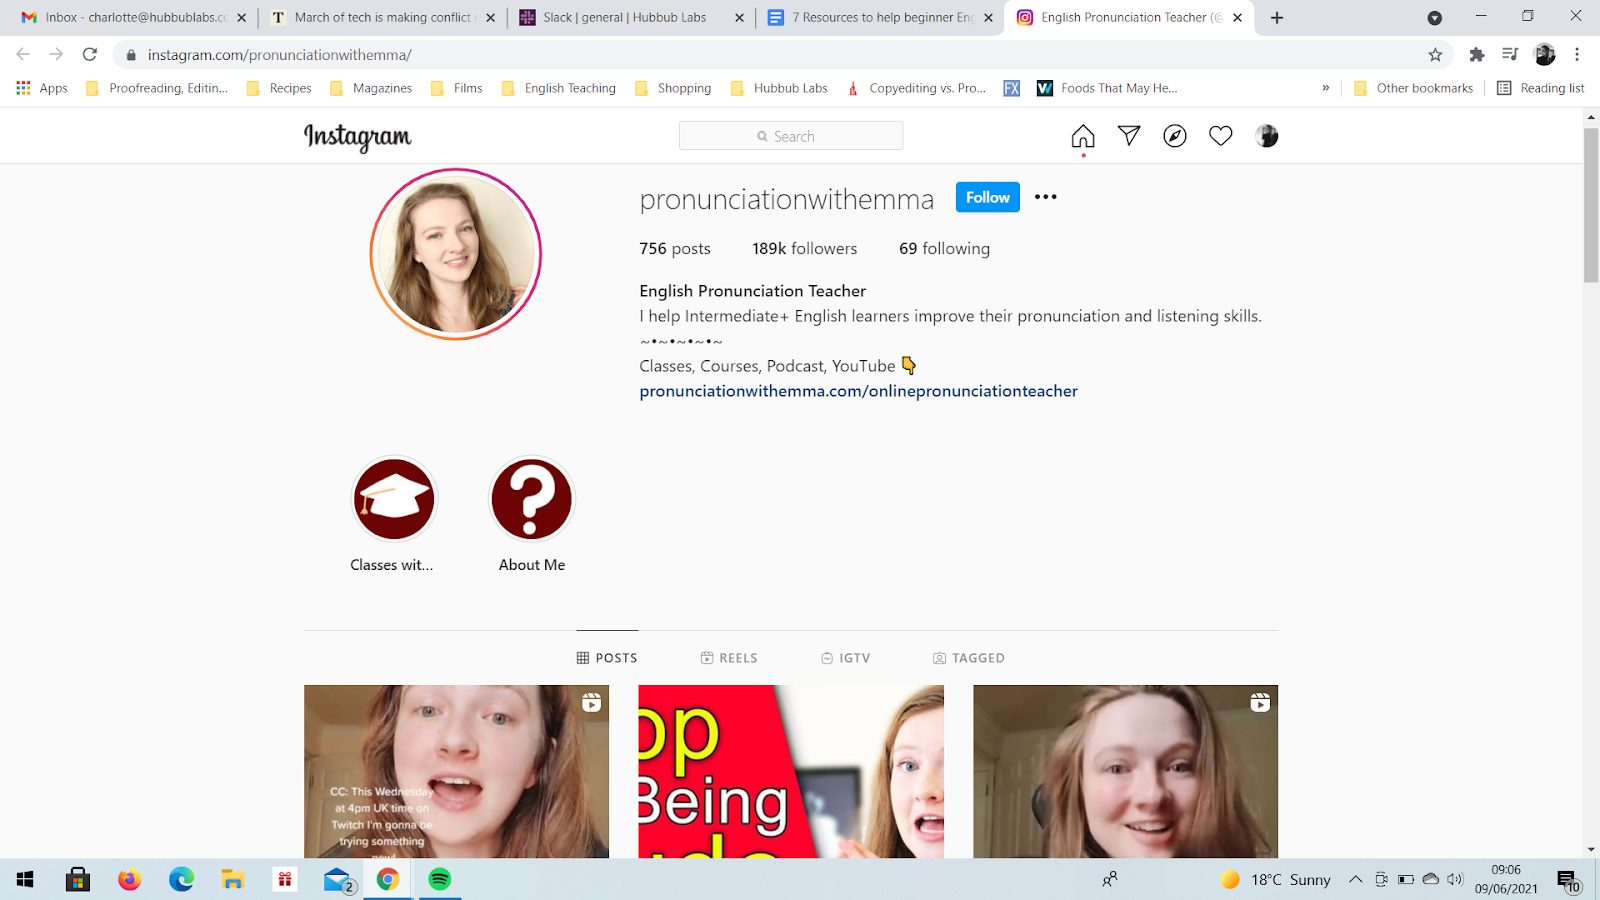 Pronunciation with Emma - Pronunciation |  8 Resources to help beginner English learners | Oxford House Barcelona